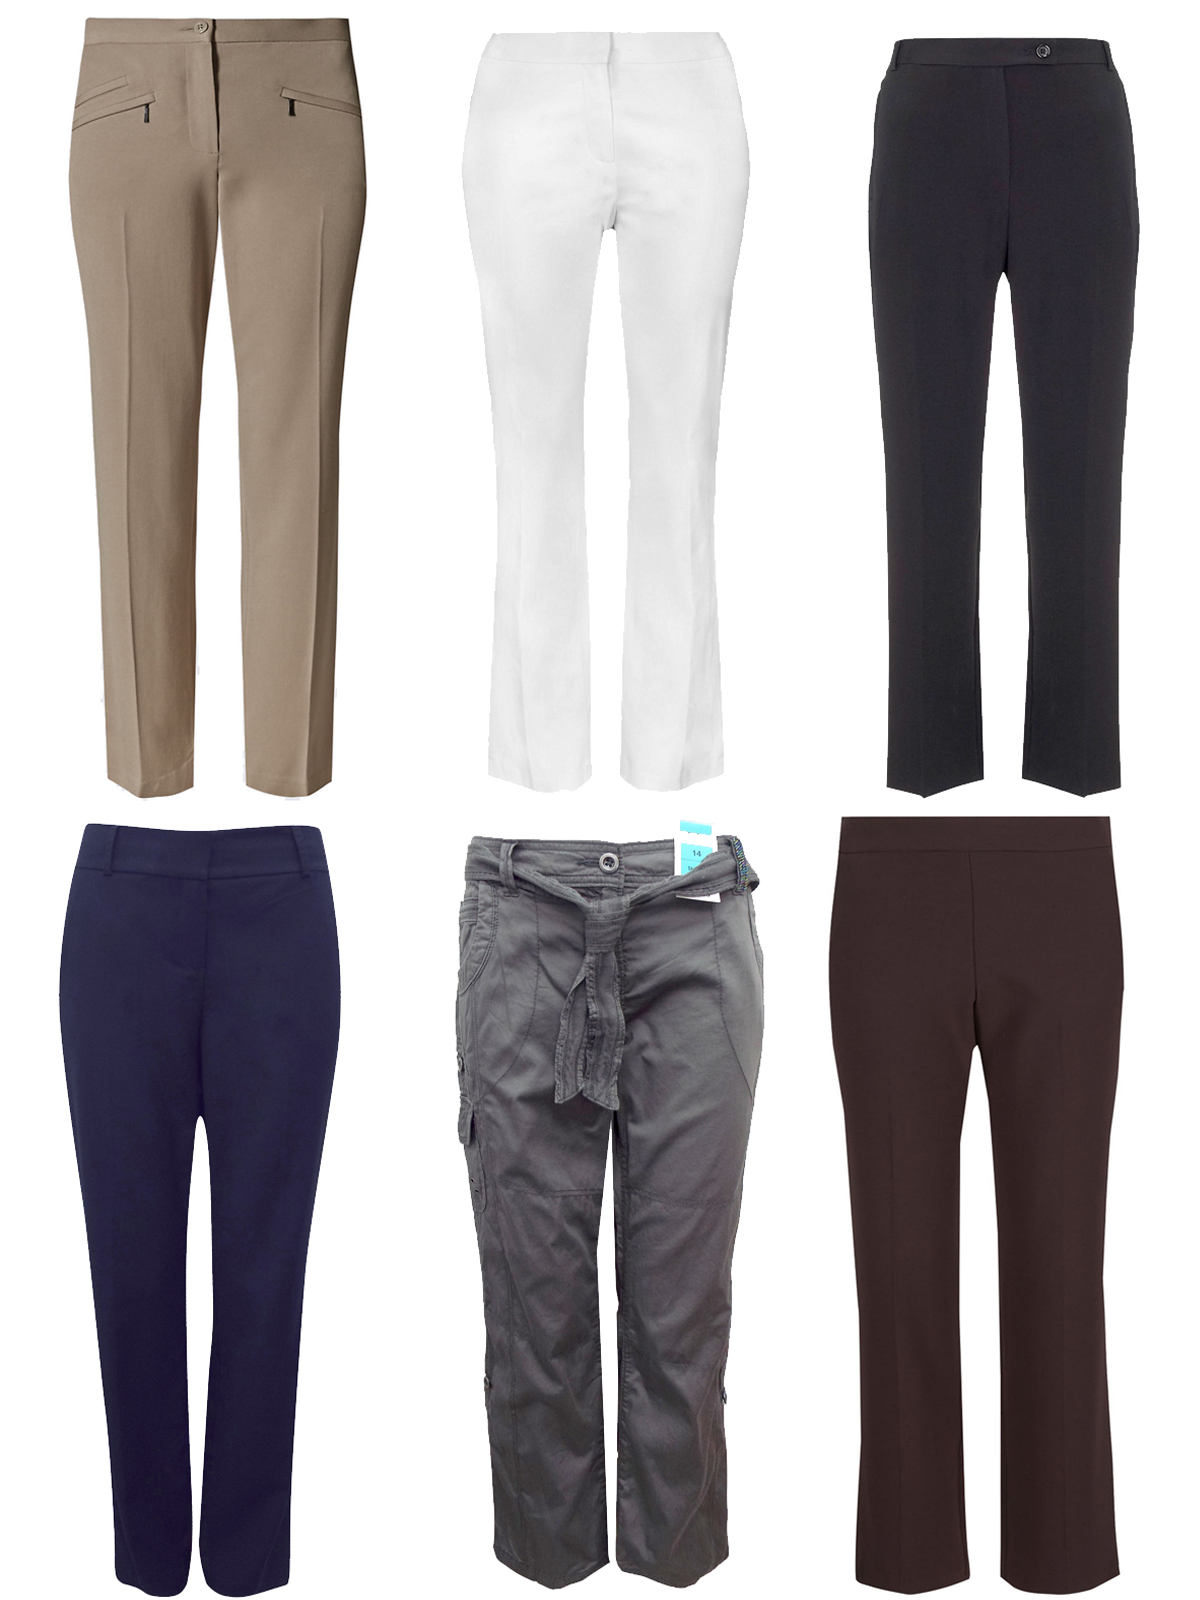 M&5 ASSORTED Ladies Trousers - Size 10 to 22